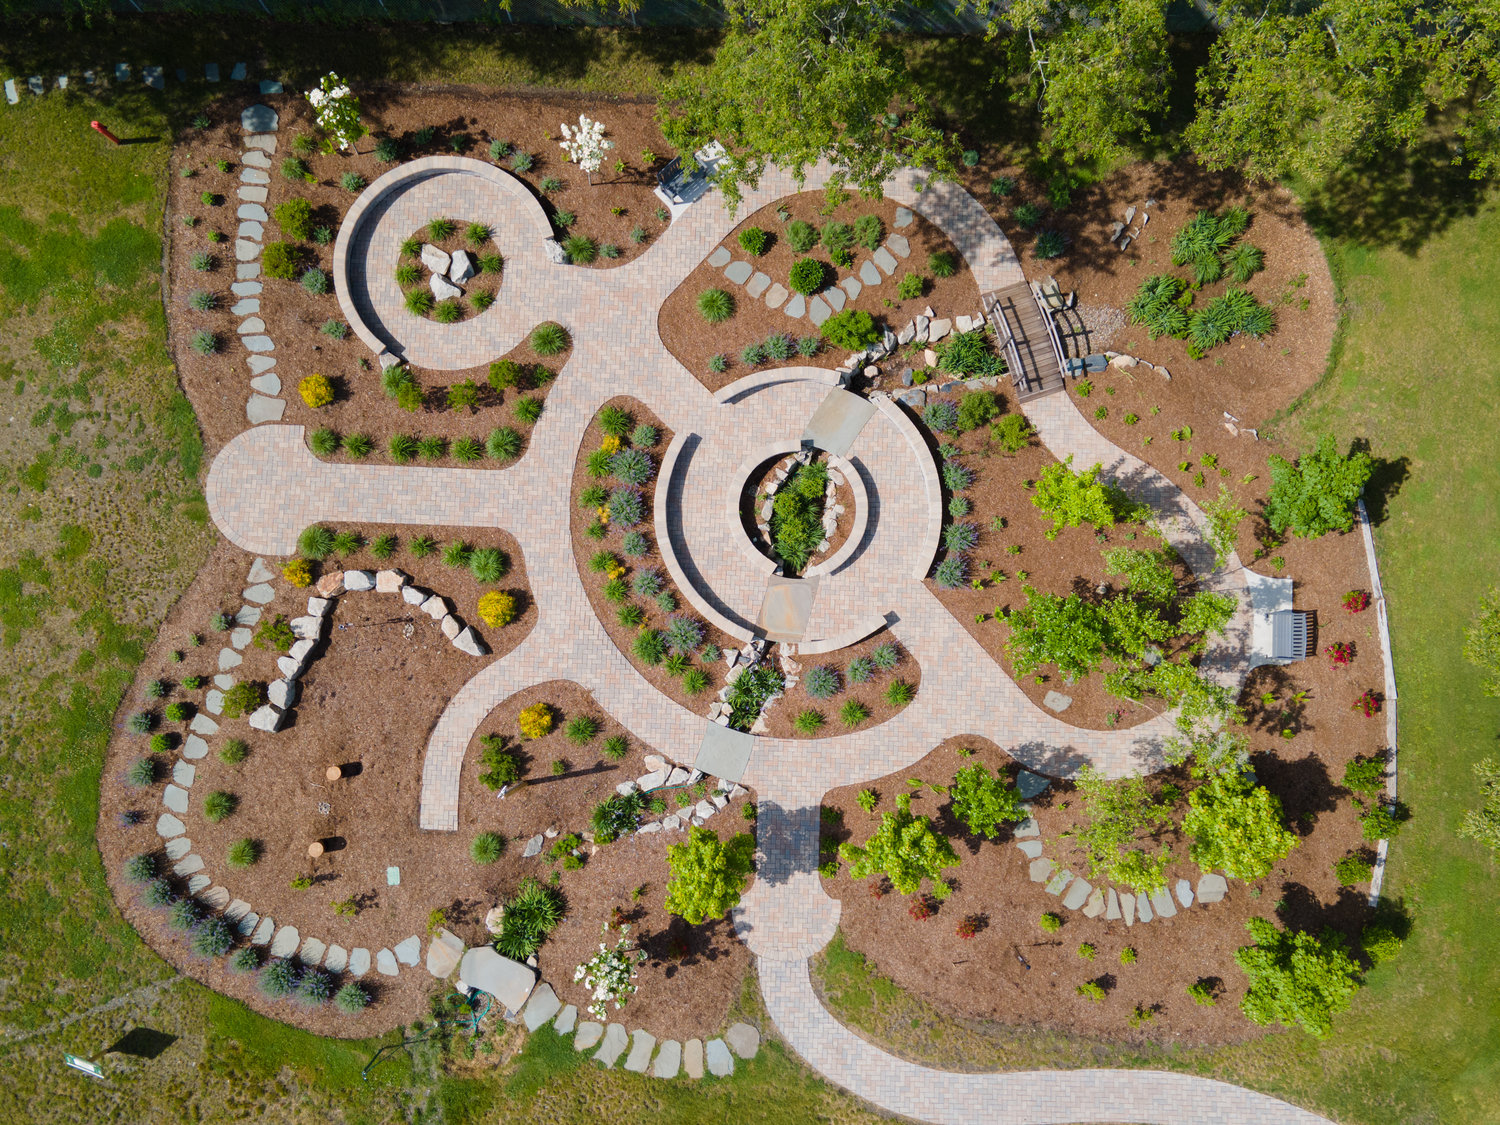 An aerial view of the rain garden at Melville School.